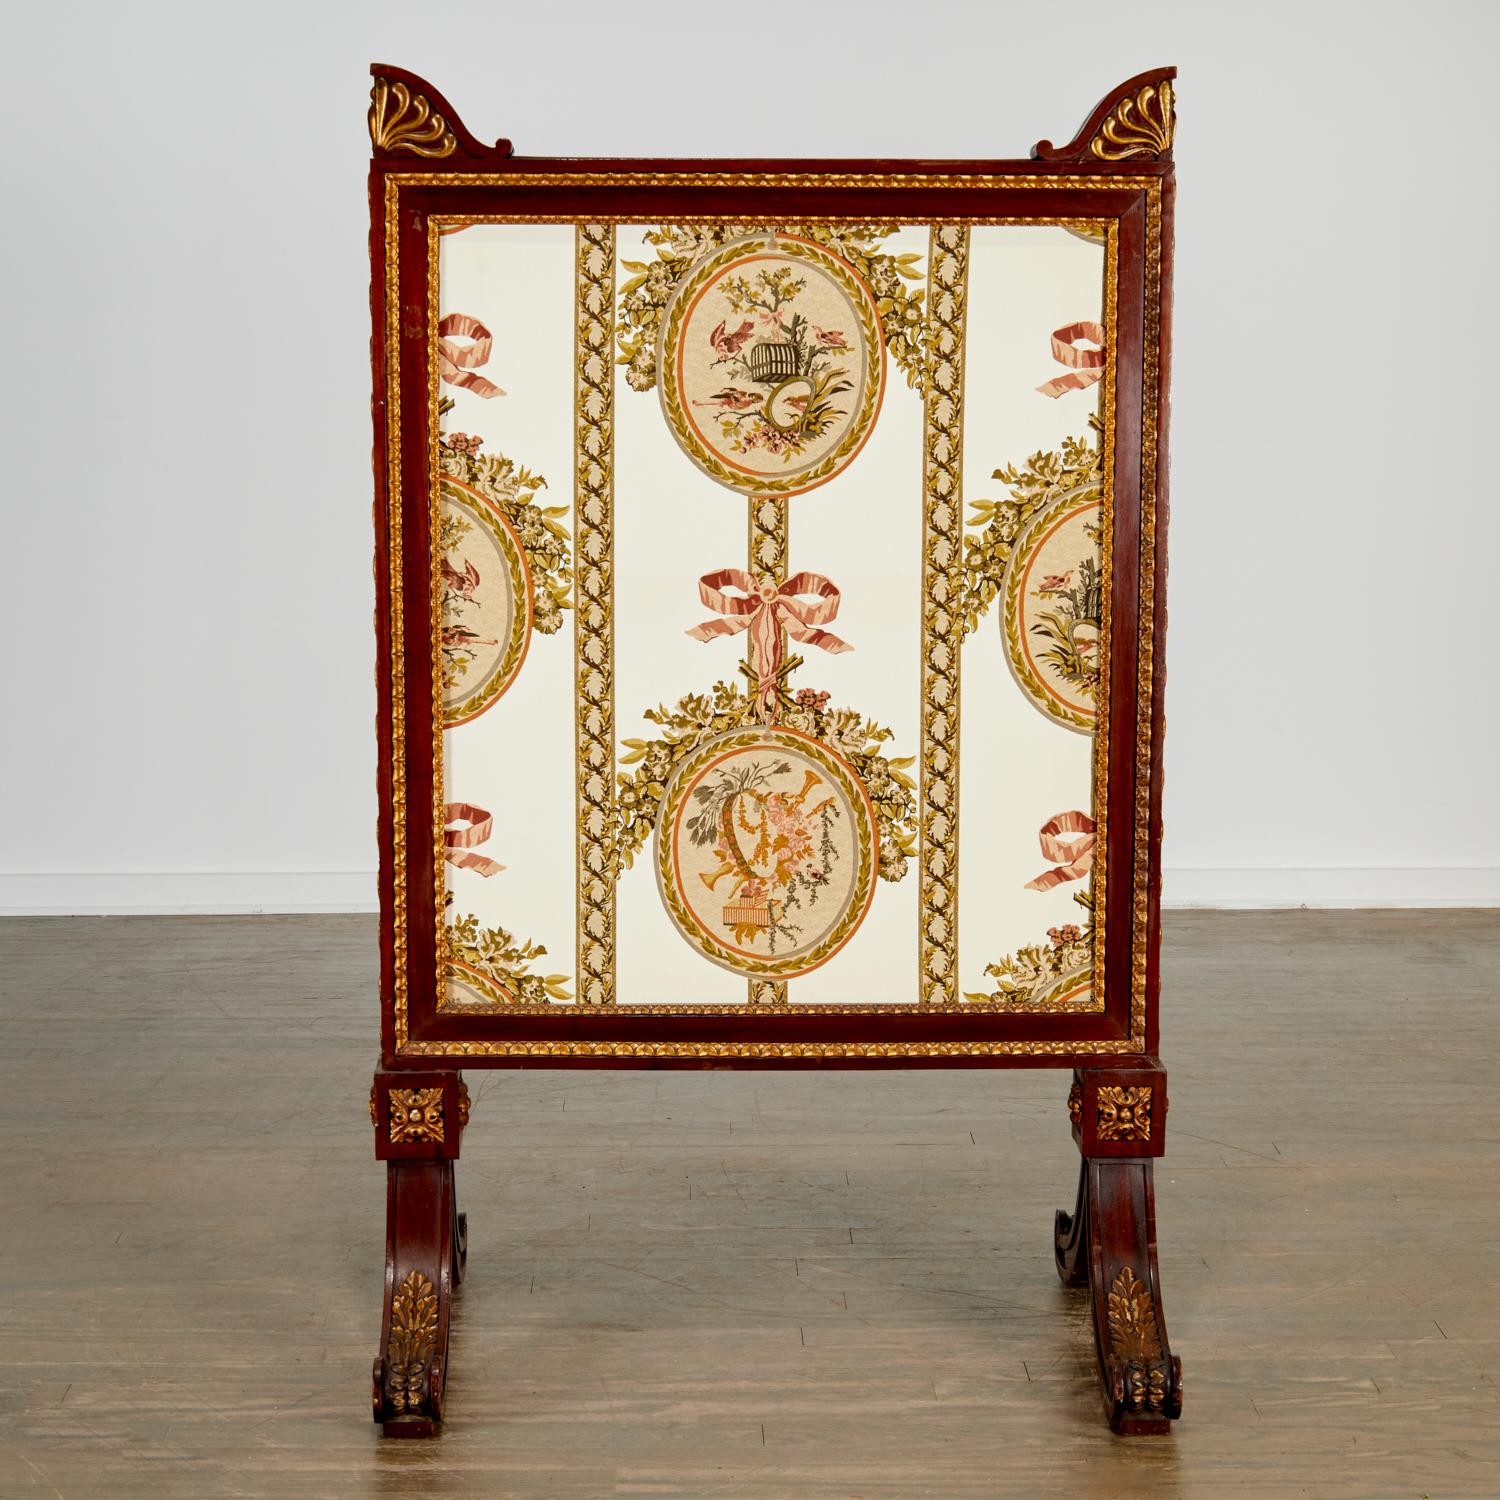 19th c., France. Substantial double sided fire screen. A mahogany rectangular frame is relief carved with parcel gilt bellflower borders and sides. The screen has a double sided printed fabric panel depicting birds and flowers in pinks, golds and